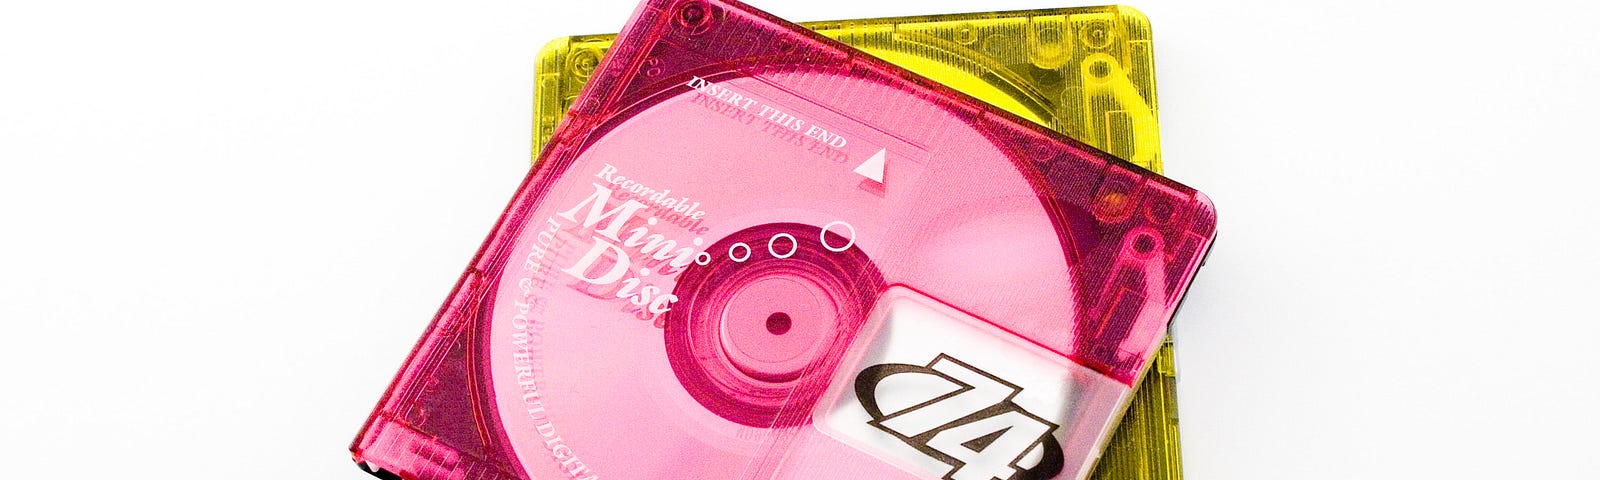 The MiniDisc: the failure of a forgotten format